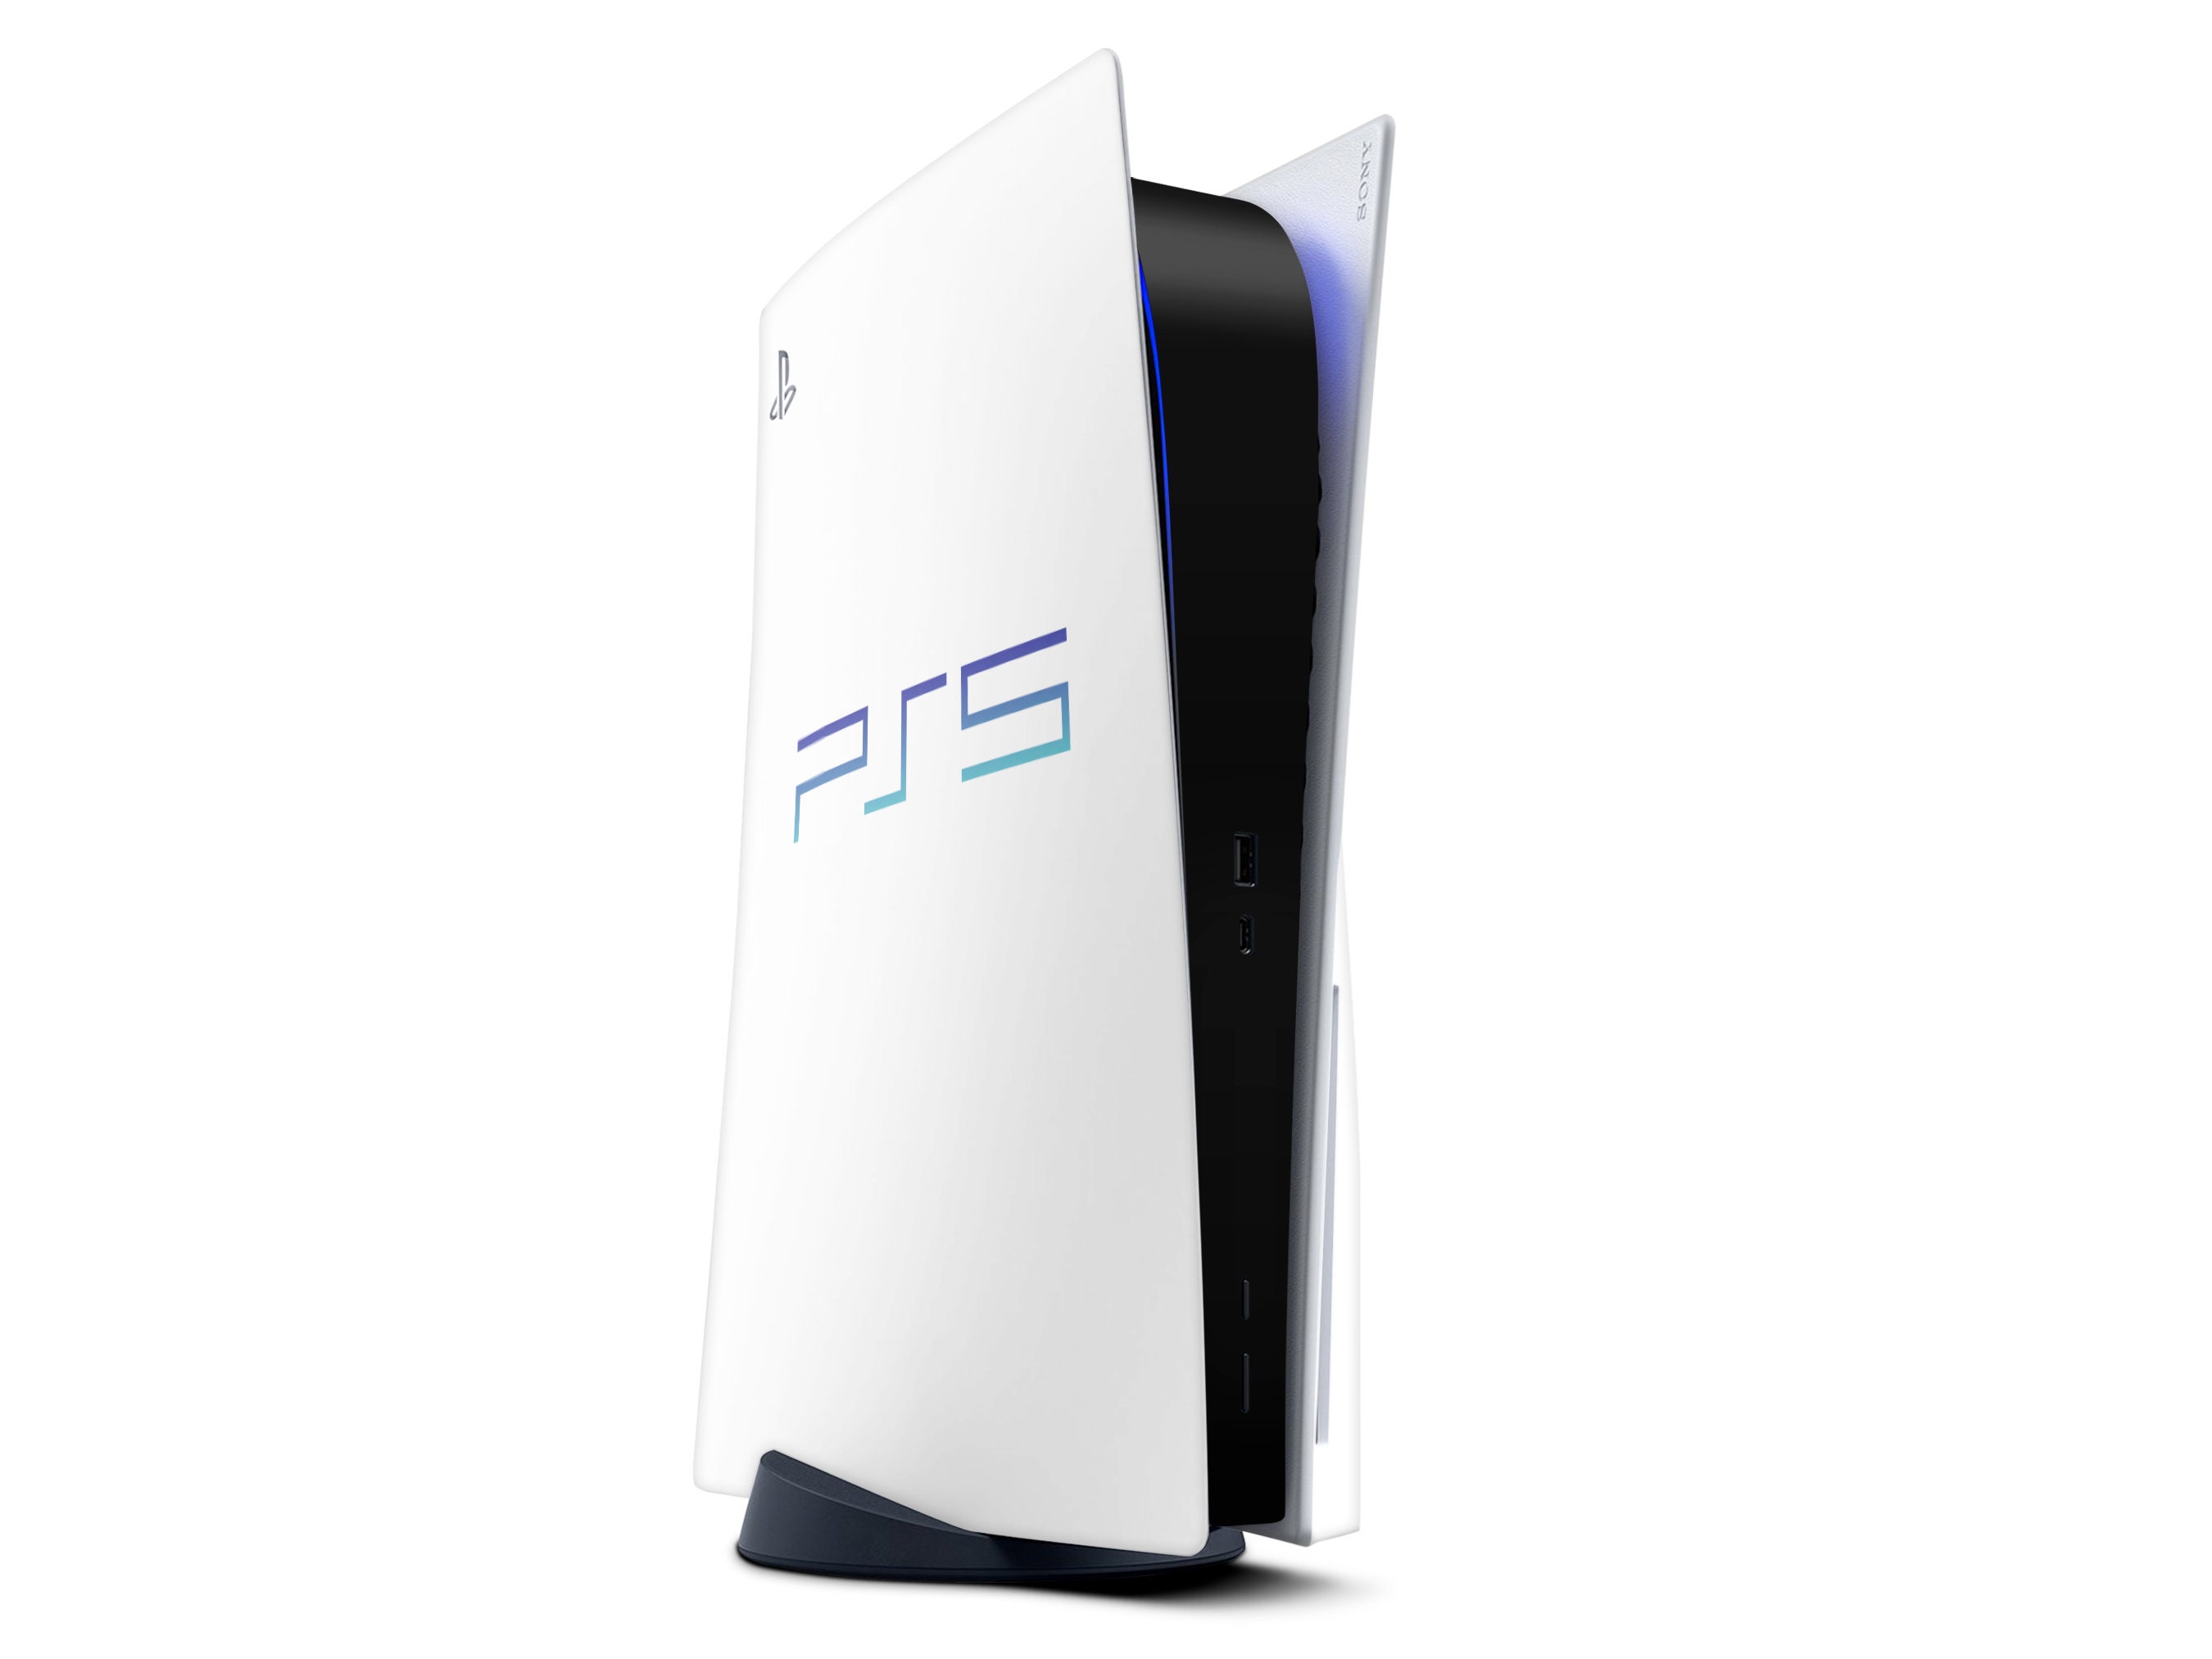 Reimagined Retro Playstation 2 Logo PS5 Skin PS2 Style 25th 